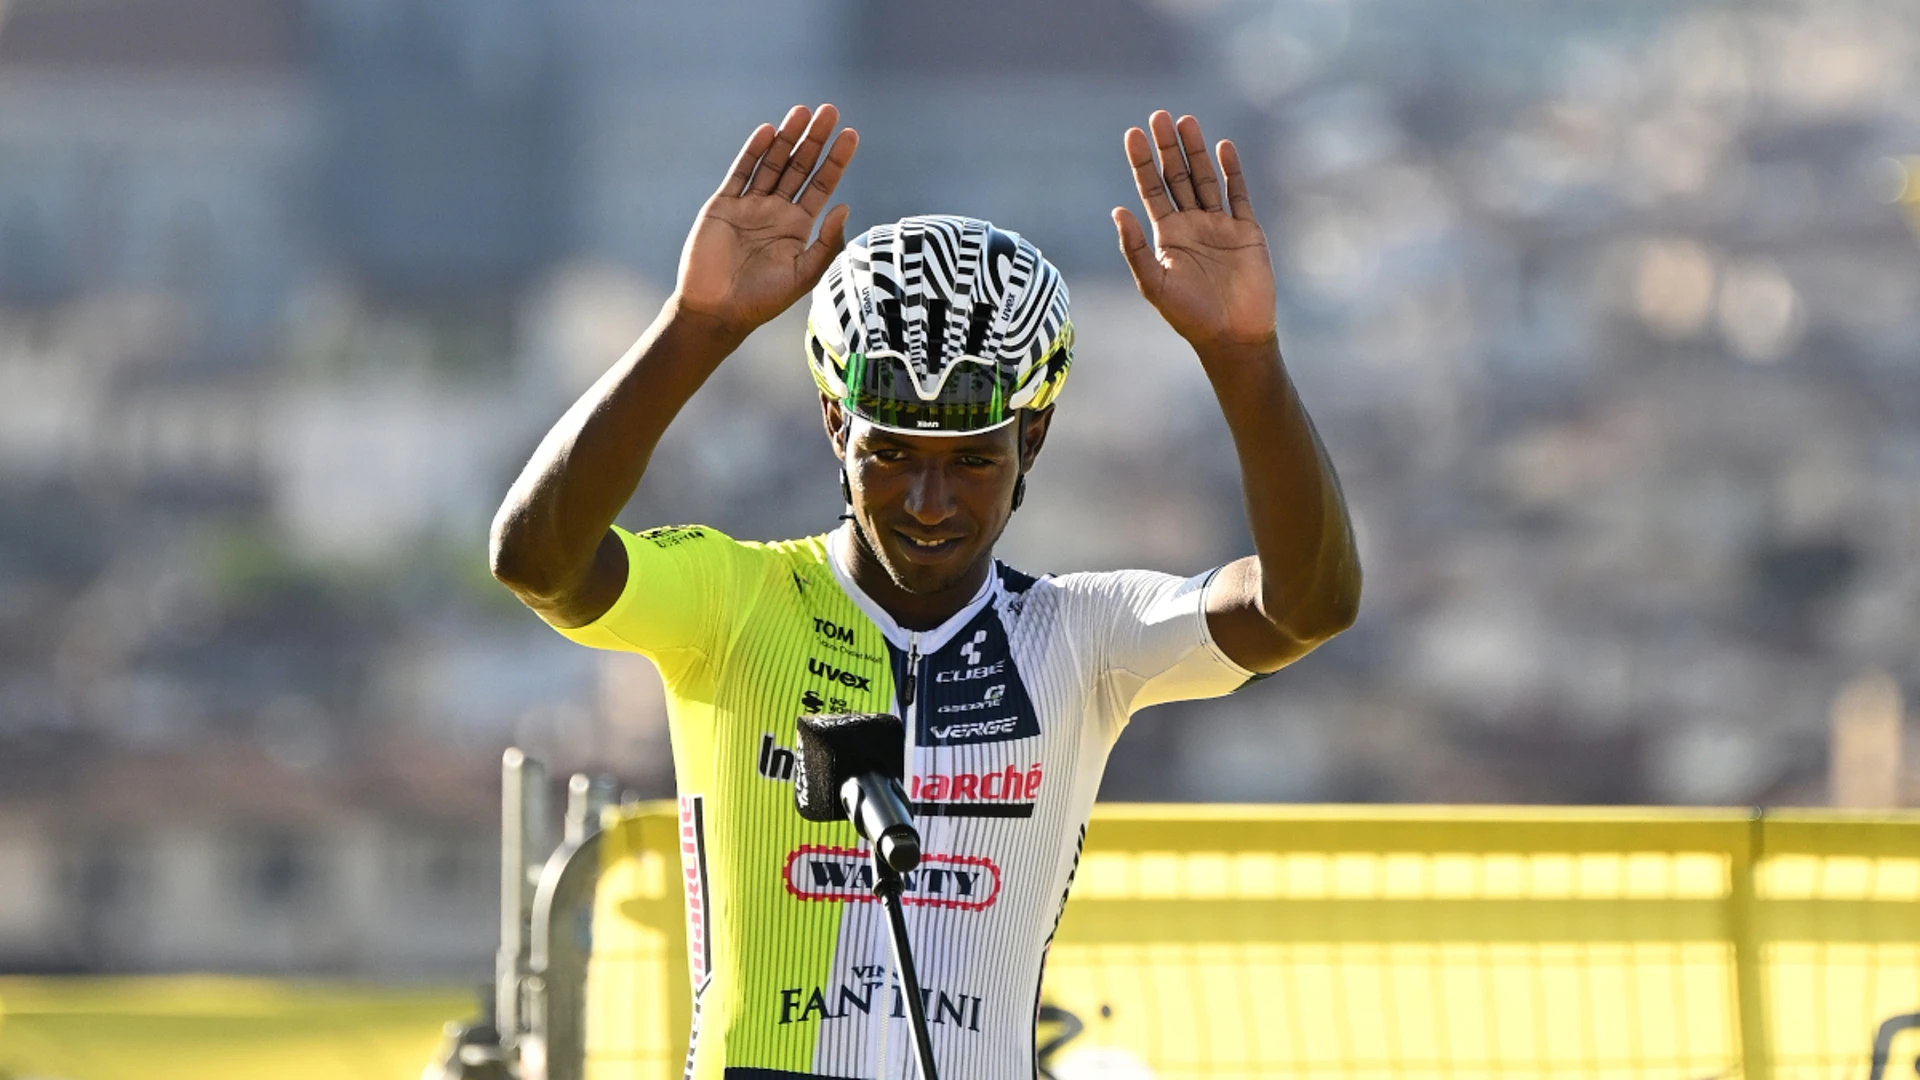 Eritrea's Girmay ready to become first Black African to win on the Tour